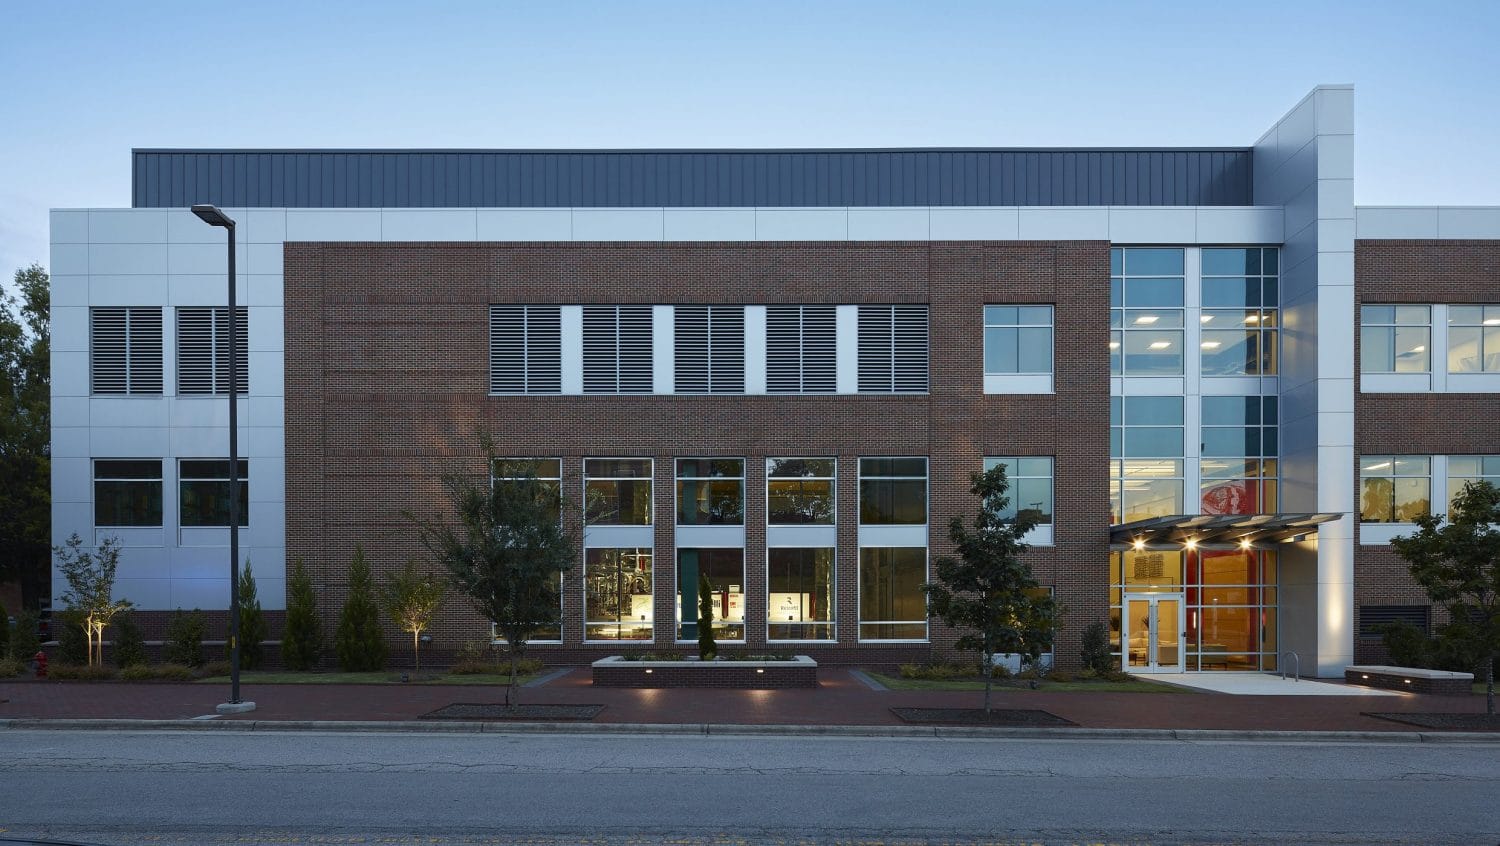 An exterior view of the Center for Technology and Innovation on Centennial Campus.